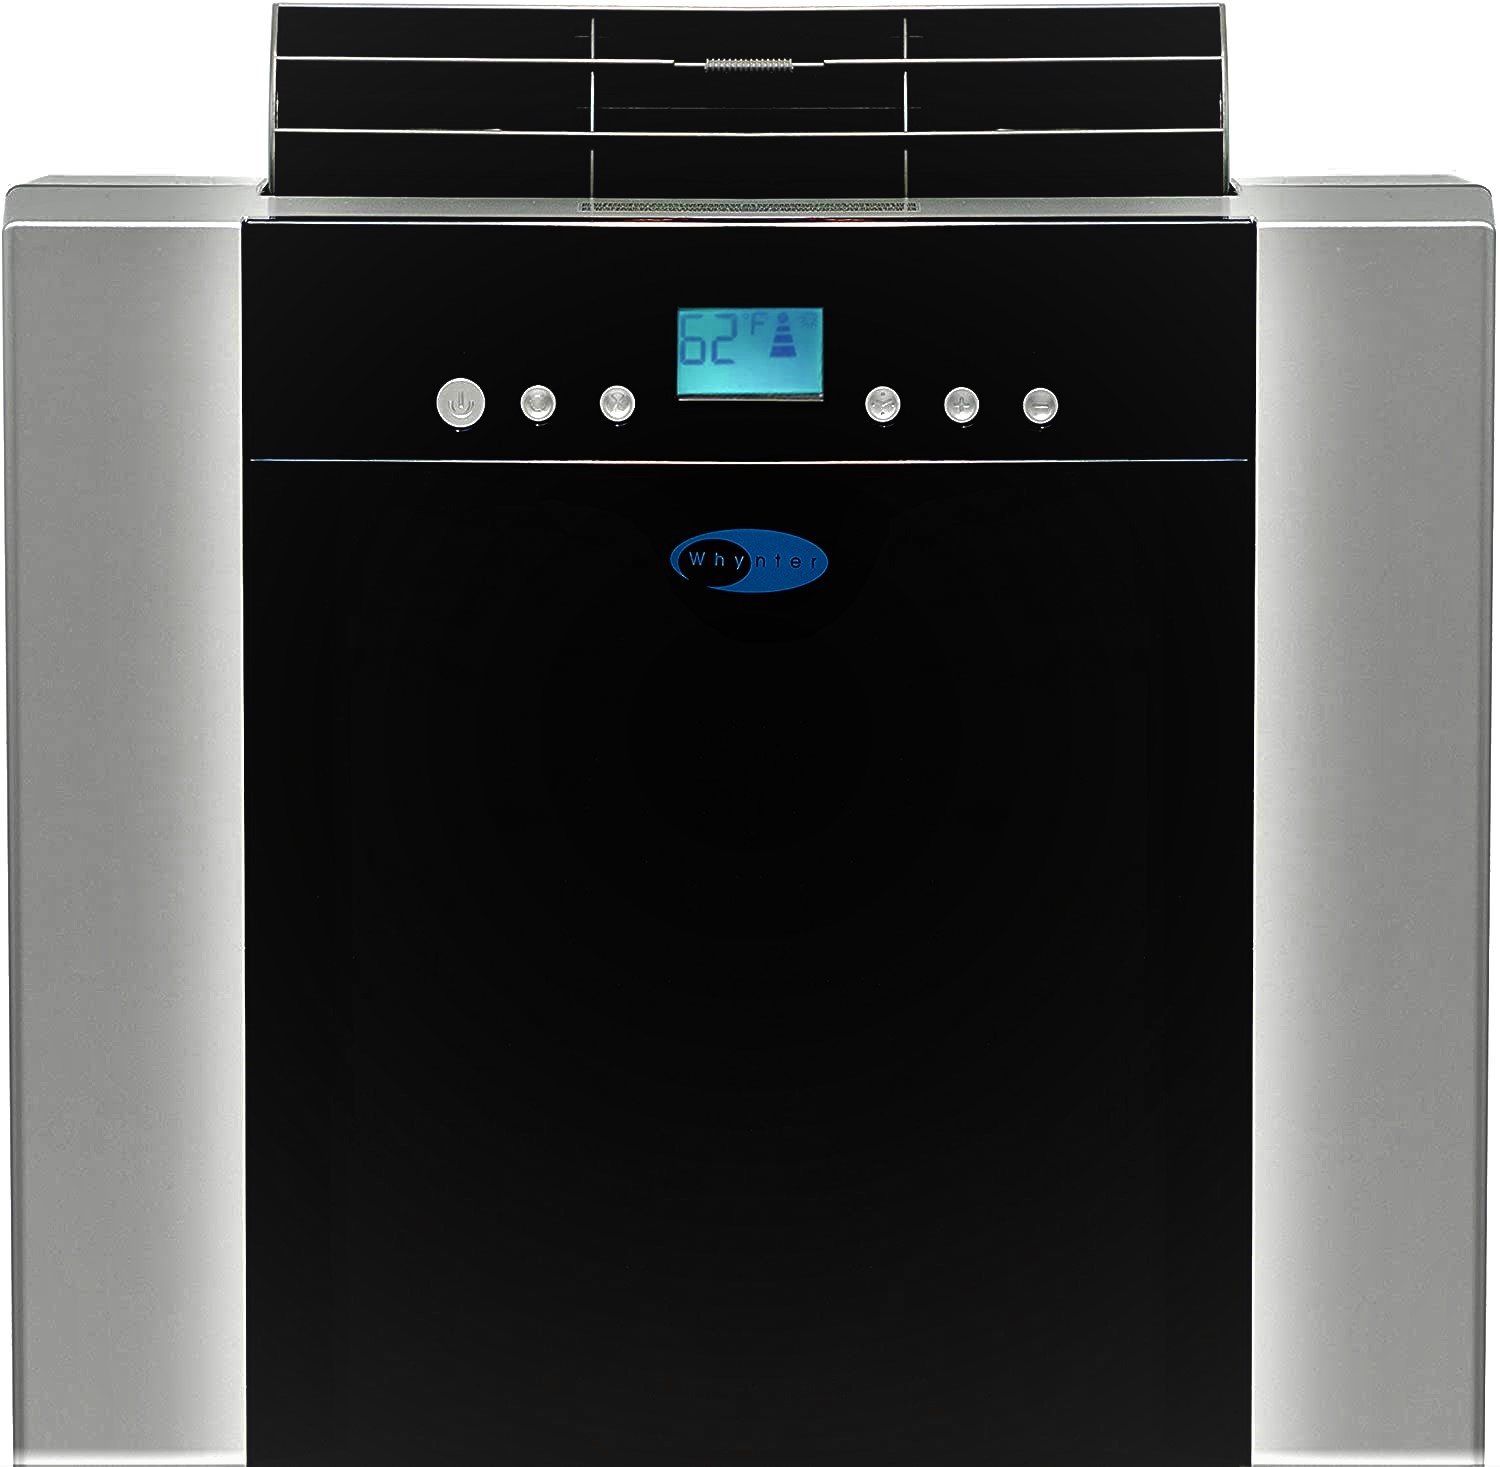 Whynter ARC-14S 14,000 BTU Dual Hose Portable Air Conditioner, Dehumidifier, Fan with Activated up to 500 sq ft room Specs